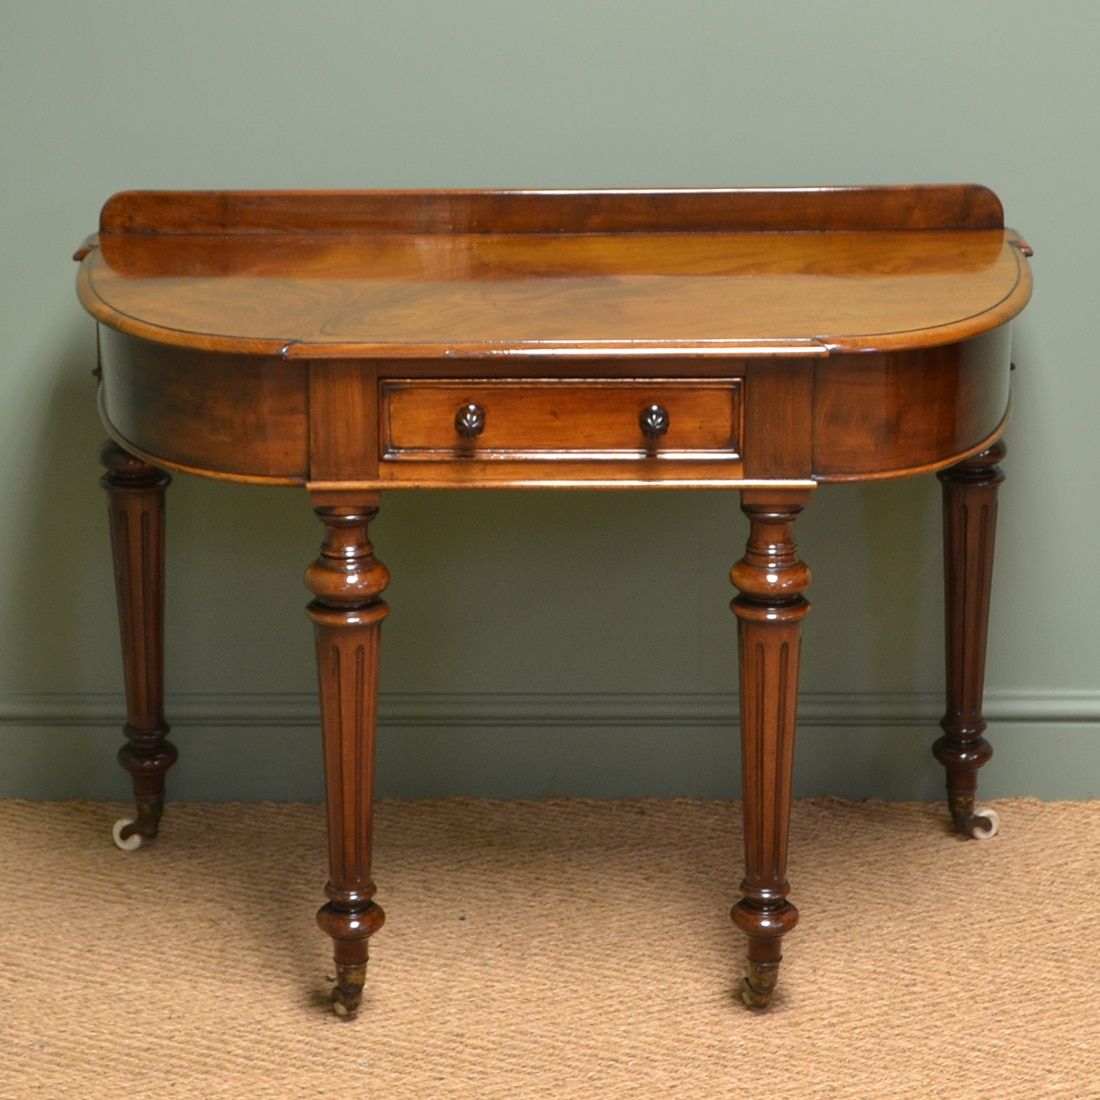 Superb Quality Figured Mahogany Antique Victorian Side Intended For Vintage Coal Console Tables (View 7 of 20)